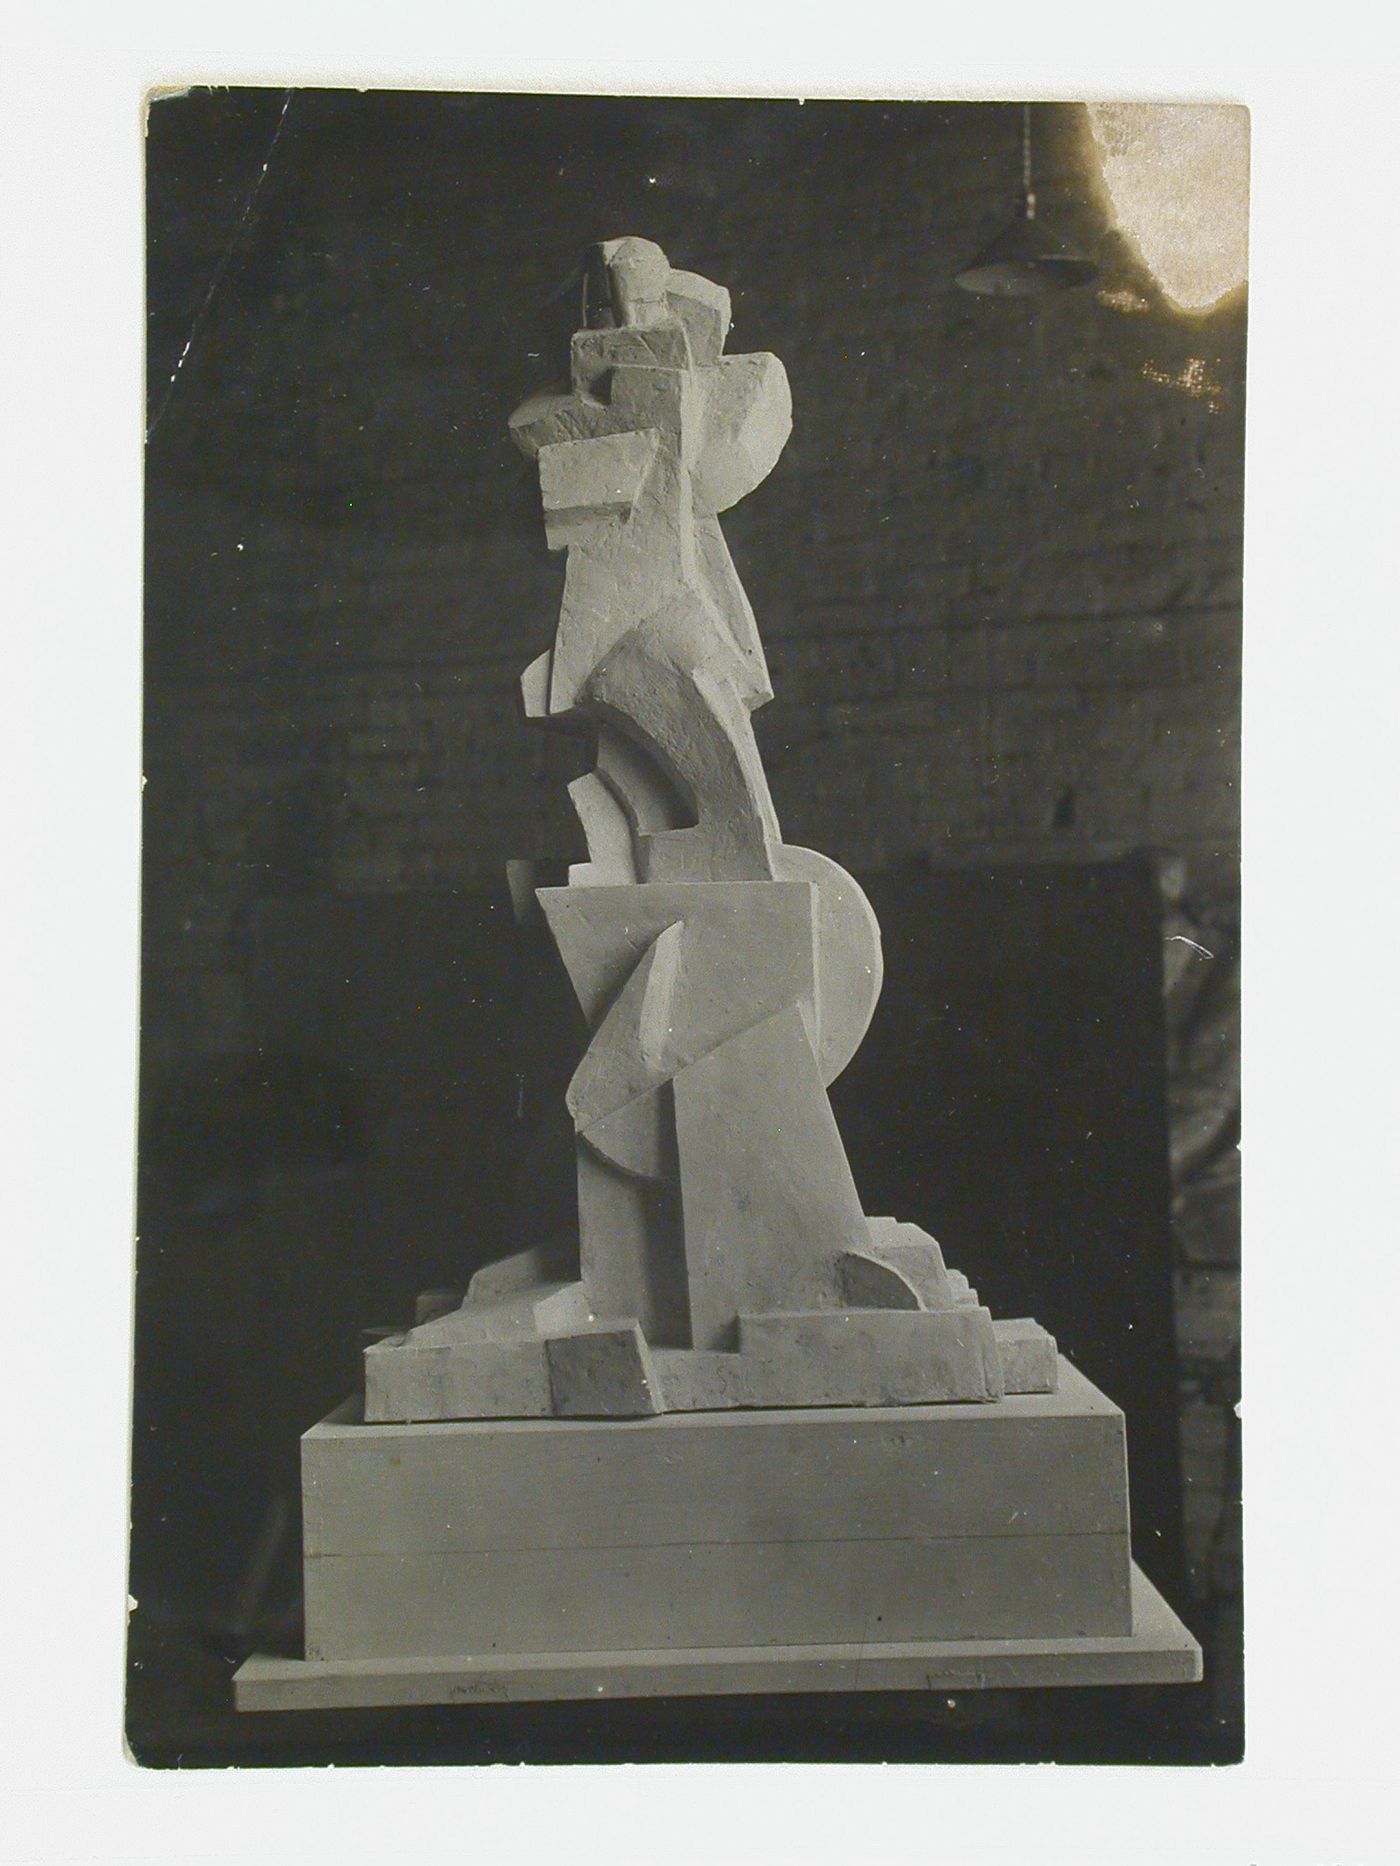 Photograph of a model for a monument to Karl Marx, Moscow